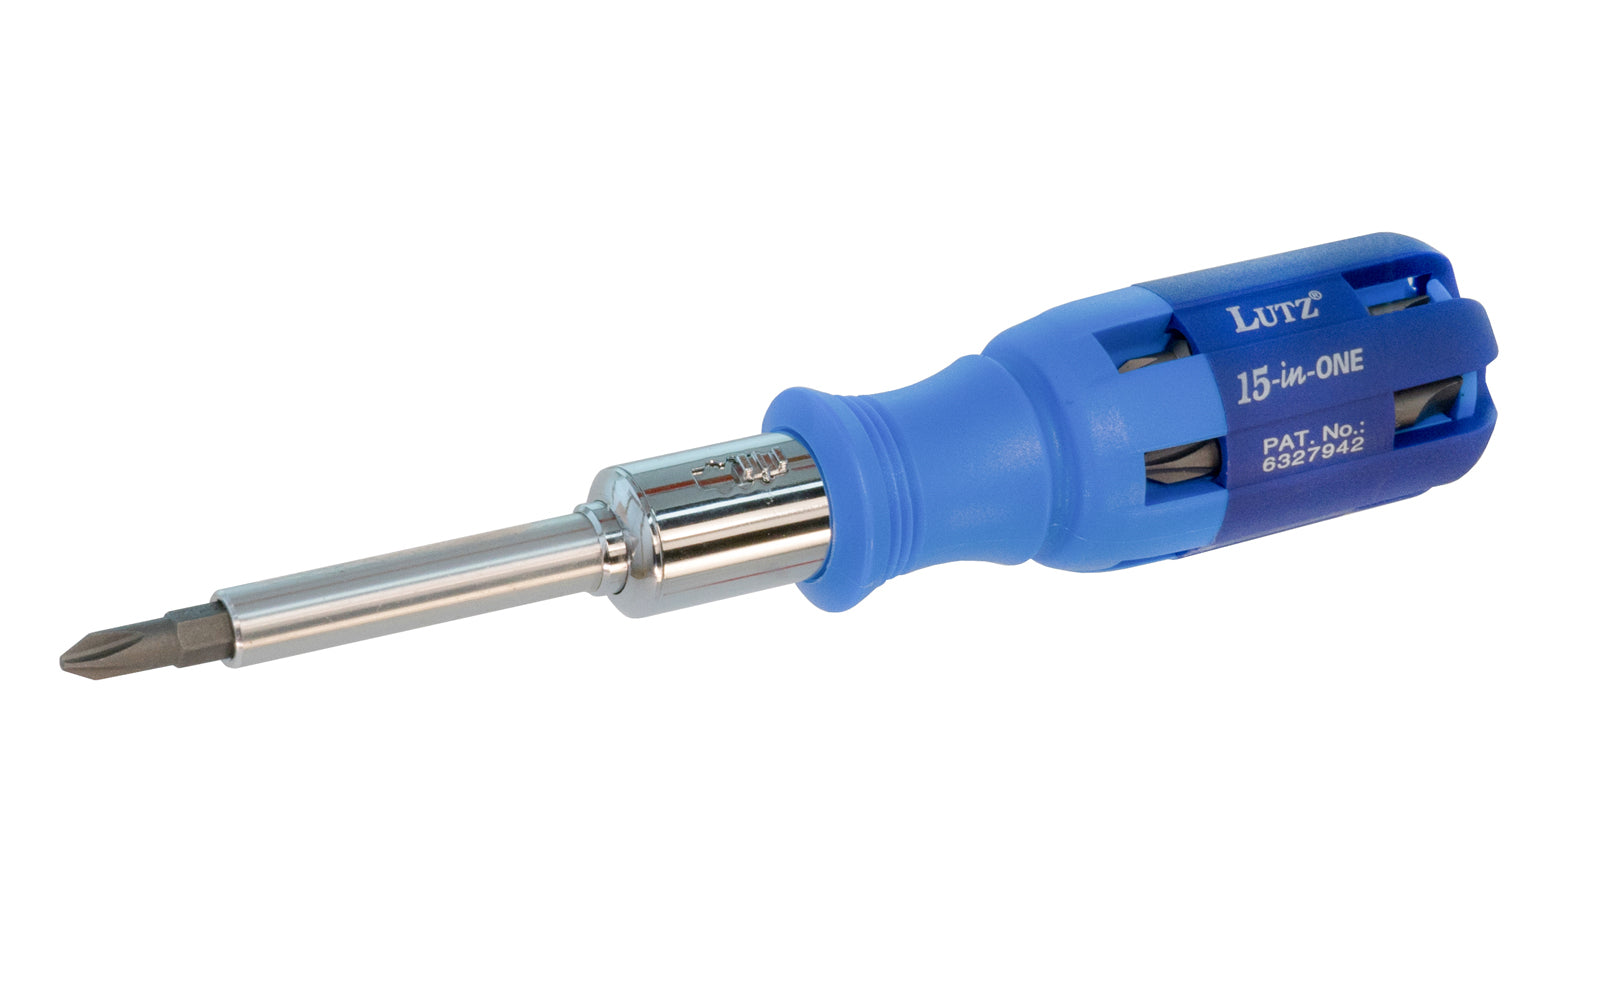 Lutz Tools ~ Lutz 15-in-One Ratchet Screwdriver - 15-in-1 Screwdriver - Ratcheting Screwdriver - Ratcheting - Chamber opens for easy access & storage - Slotted Bits - Square Driver Bits - Phillips Bits - Torx Bits - 8